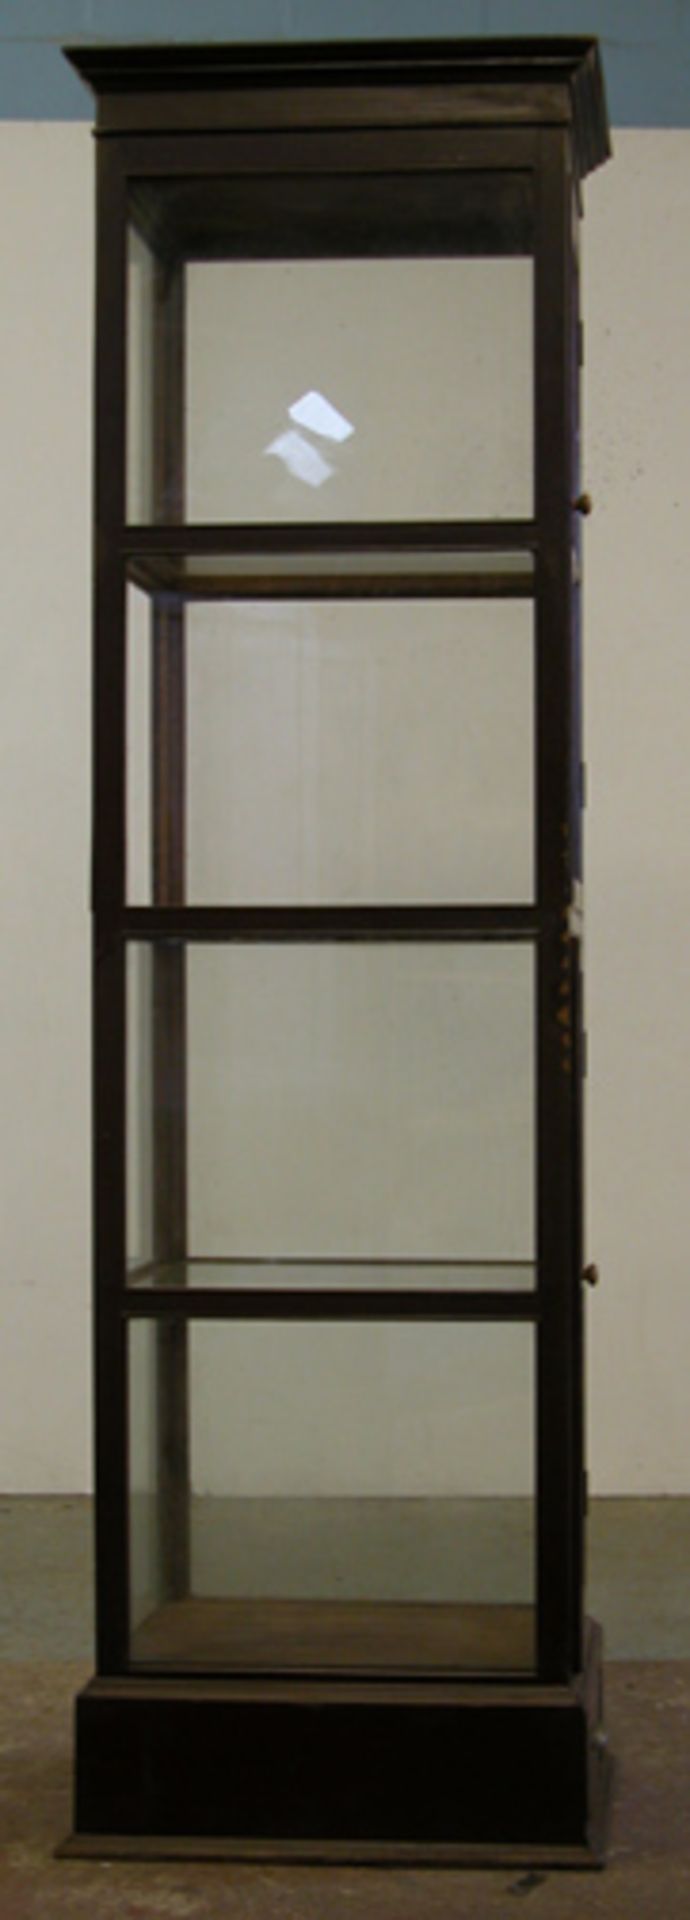 ANTIQUE TEAK SHOWCASE, LATE VICTORIAN. HEIGHT 2285MM (90IN) X WIDTH 545MM (21.25IN) X CORNICE DEPTH - Image 6 of 6